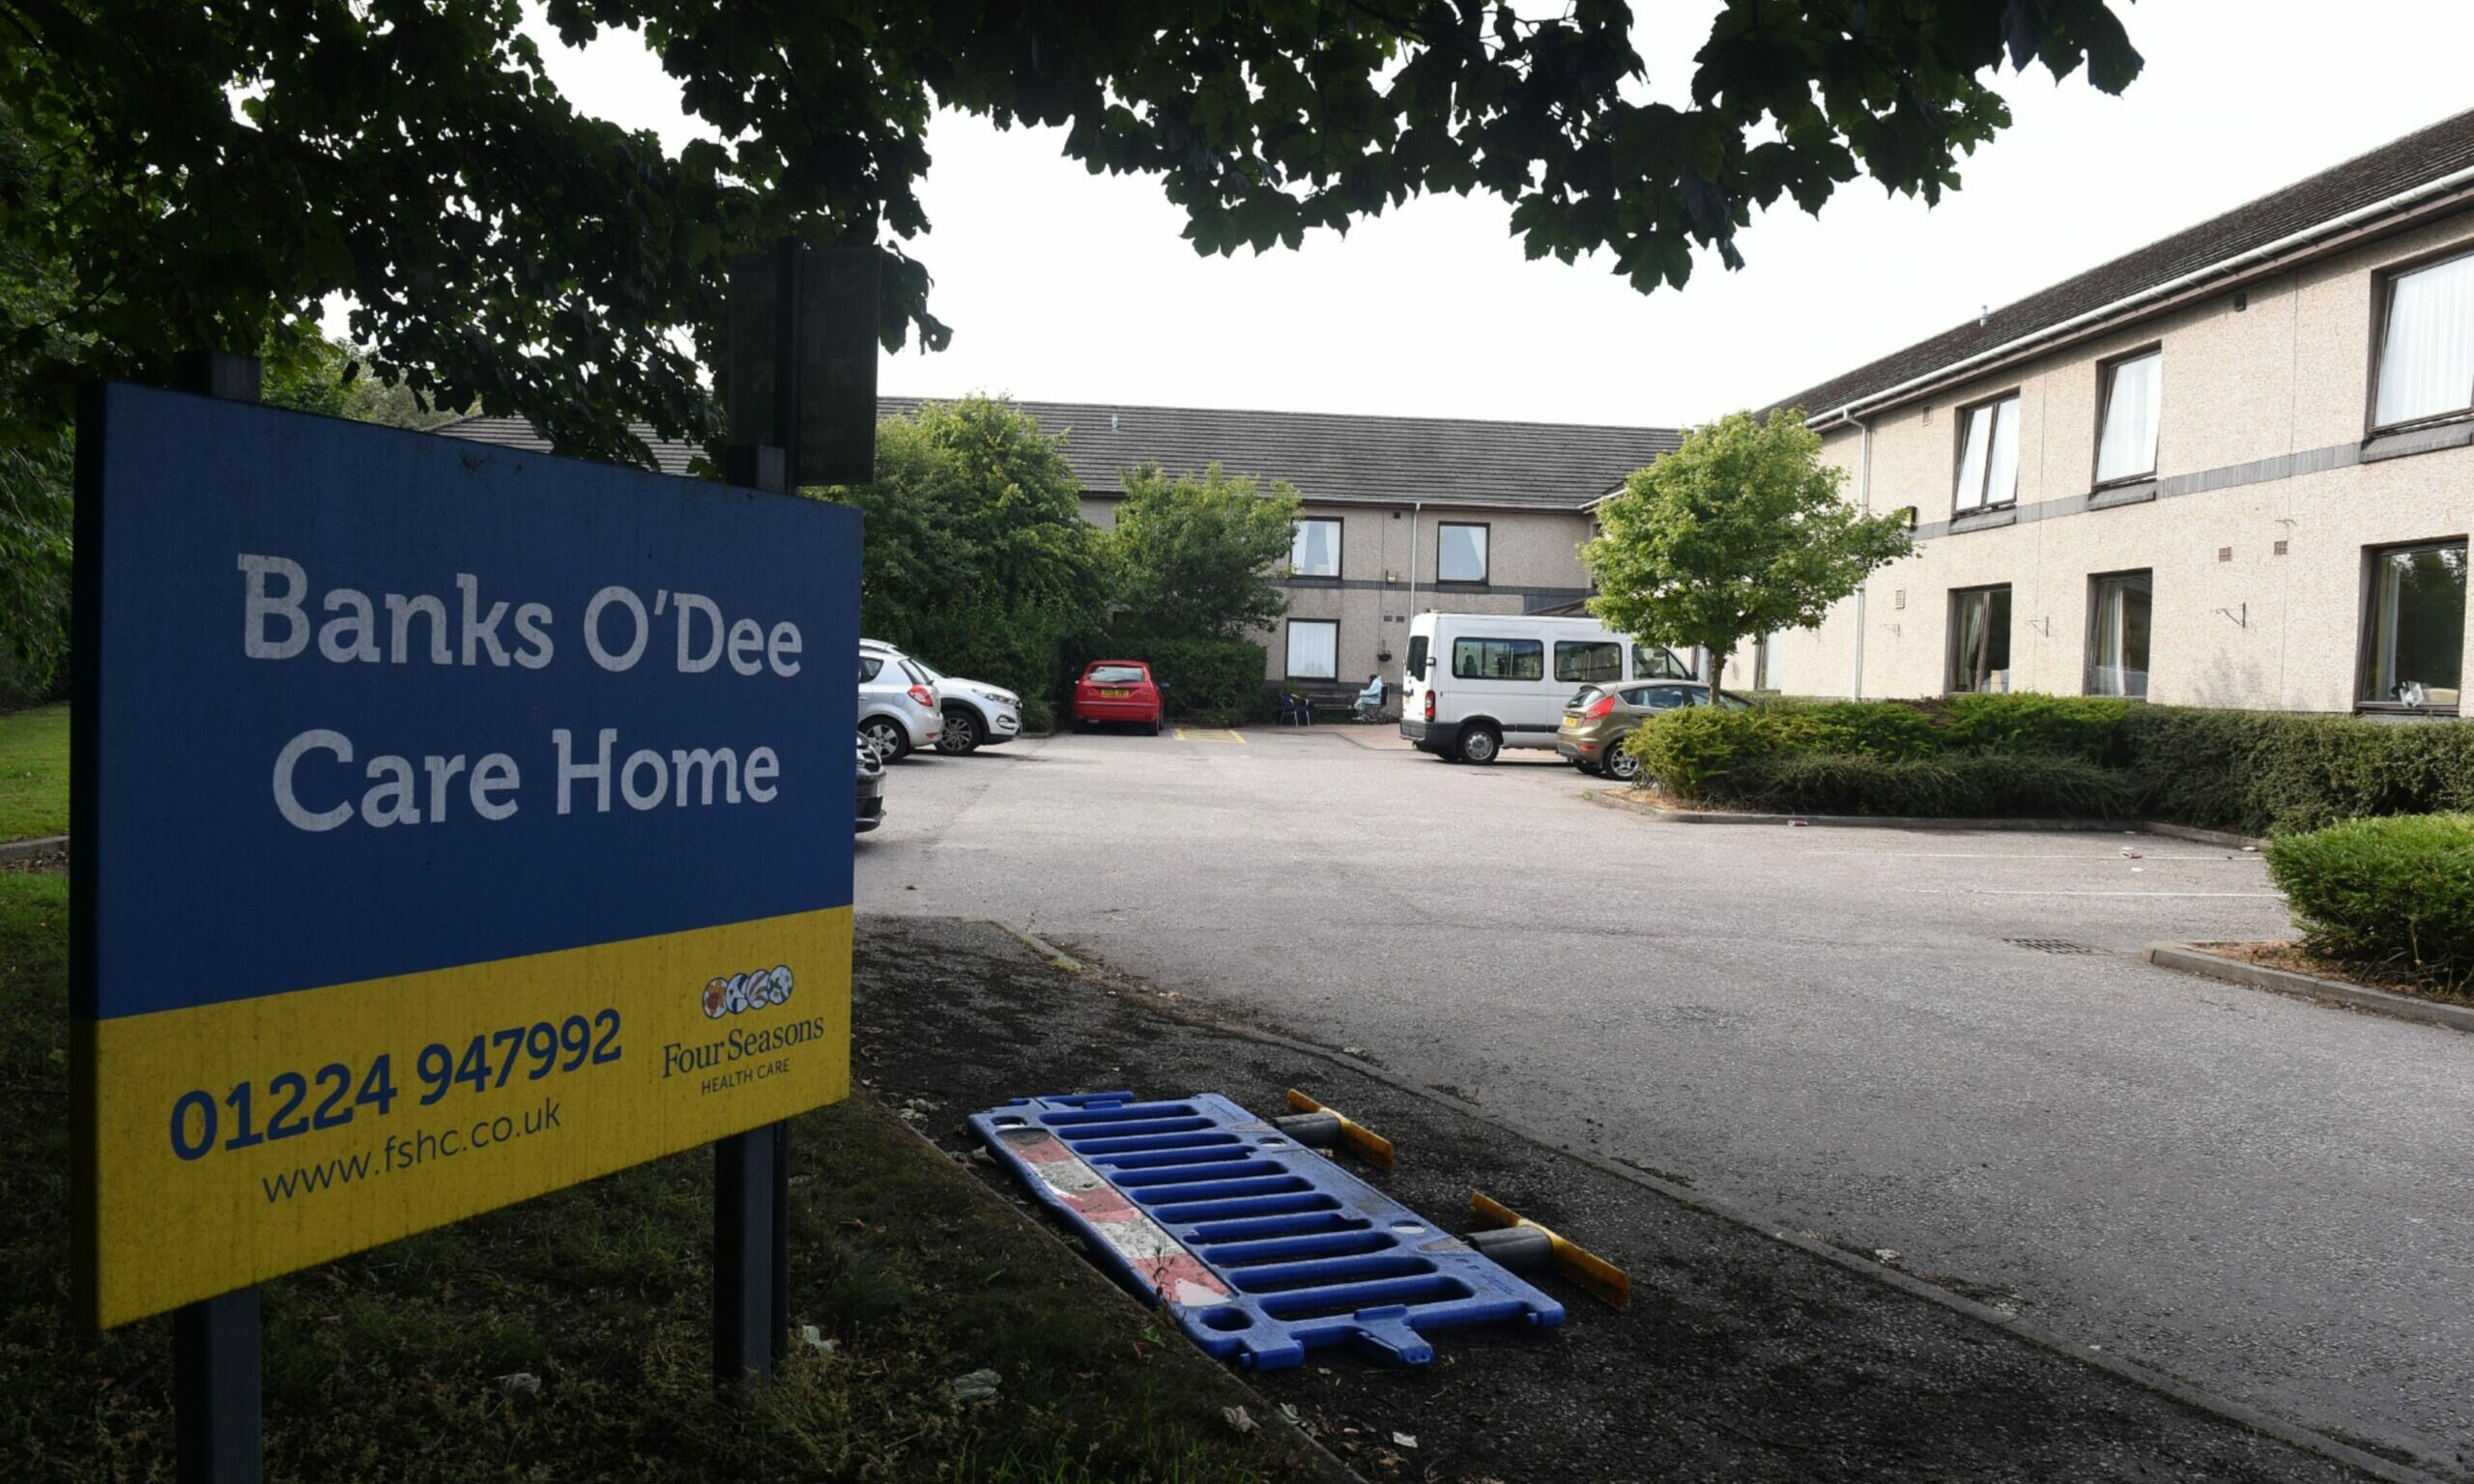 The Banks O'Dee care home at Tullos could soon be turned into flats.